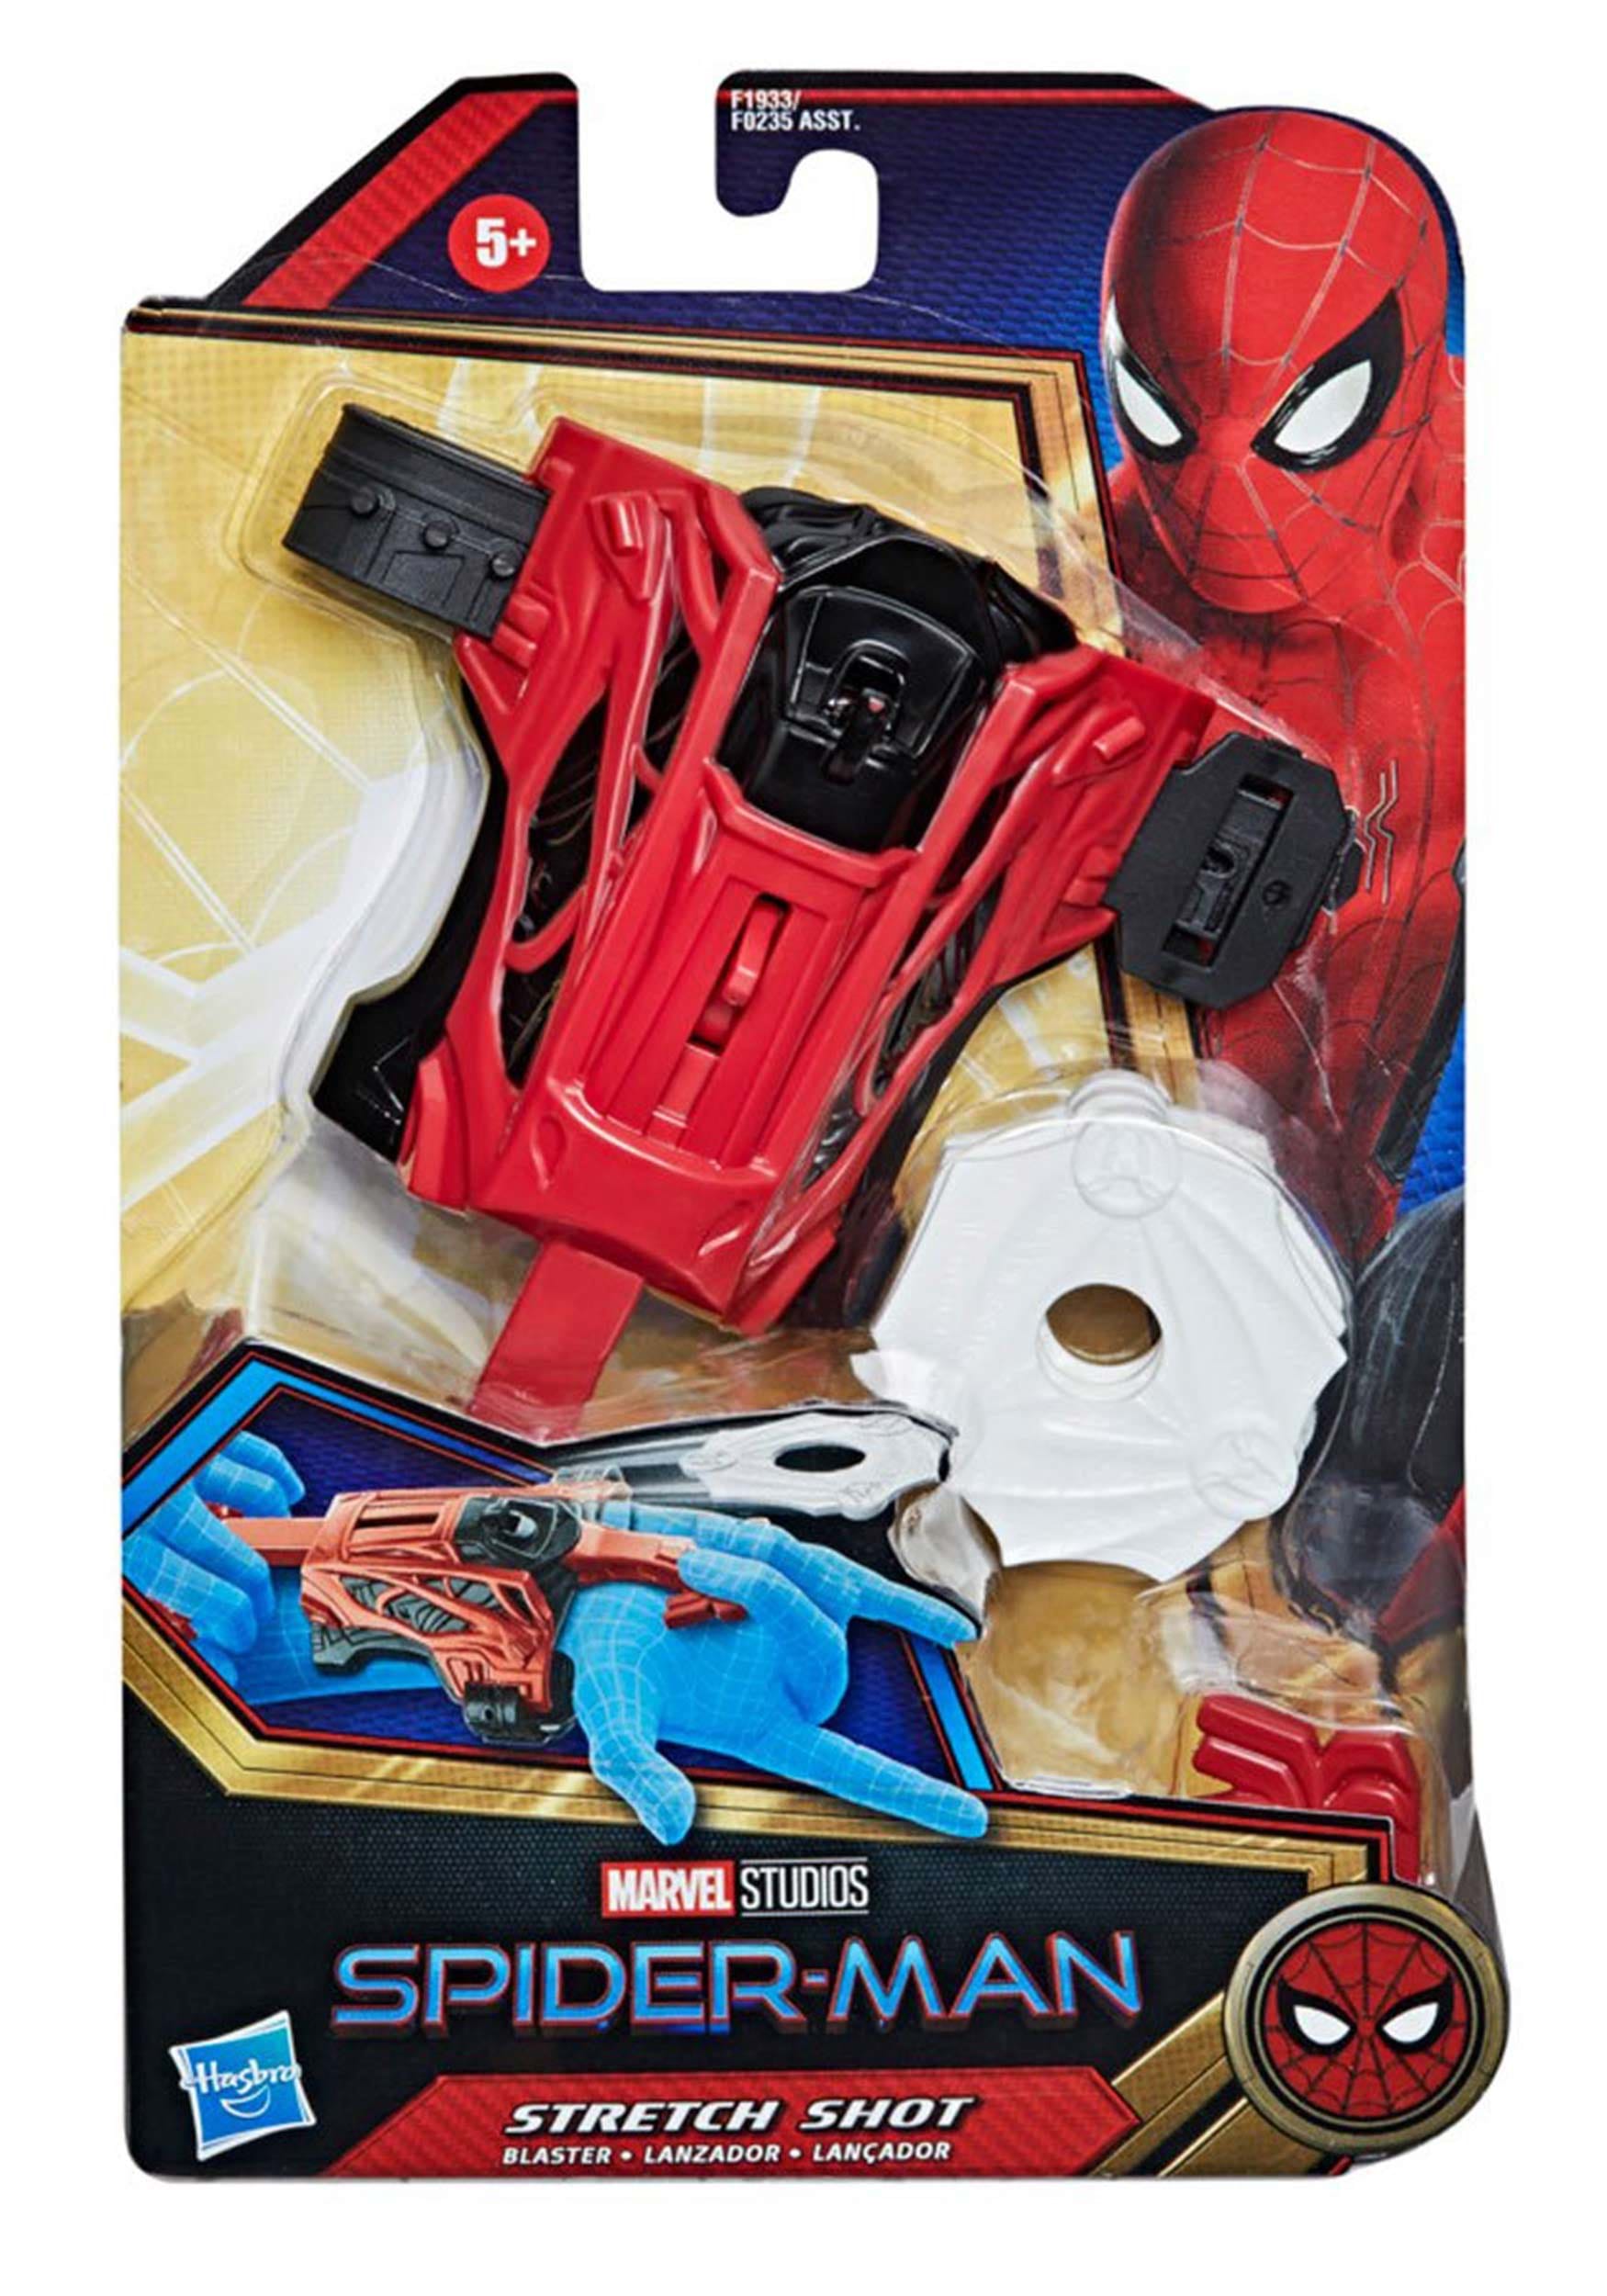 Marvel Spider-Man 3 No Way Home Dr Strange Action Mystery Web Gear